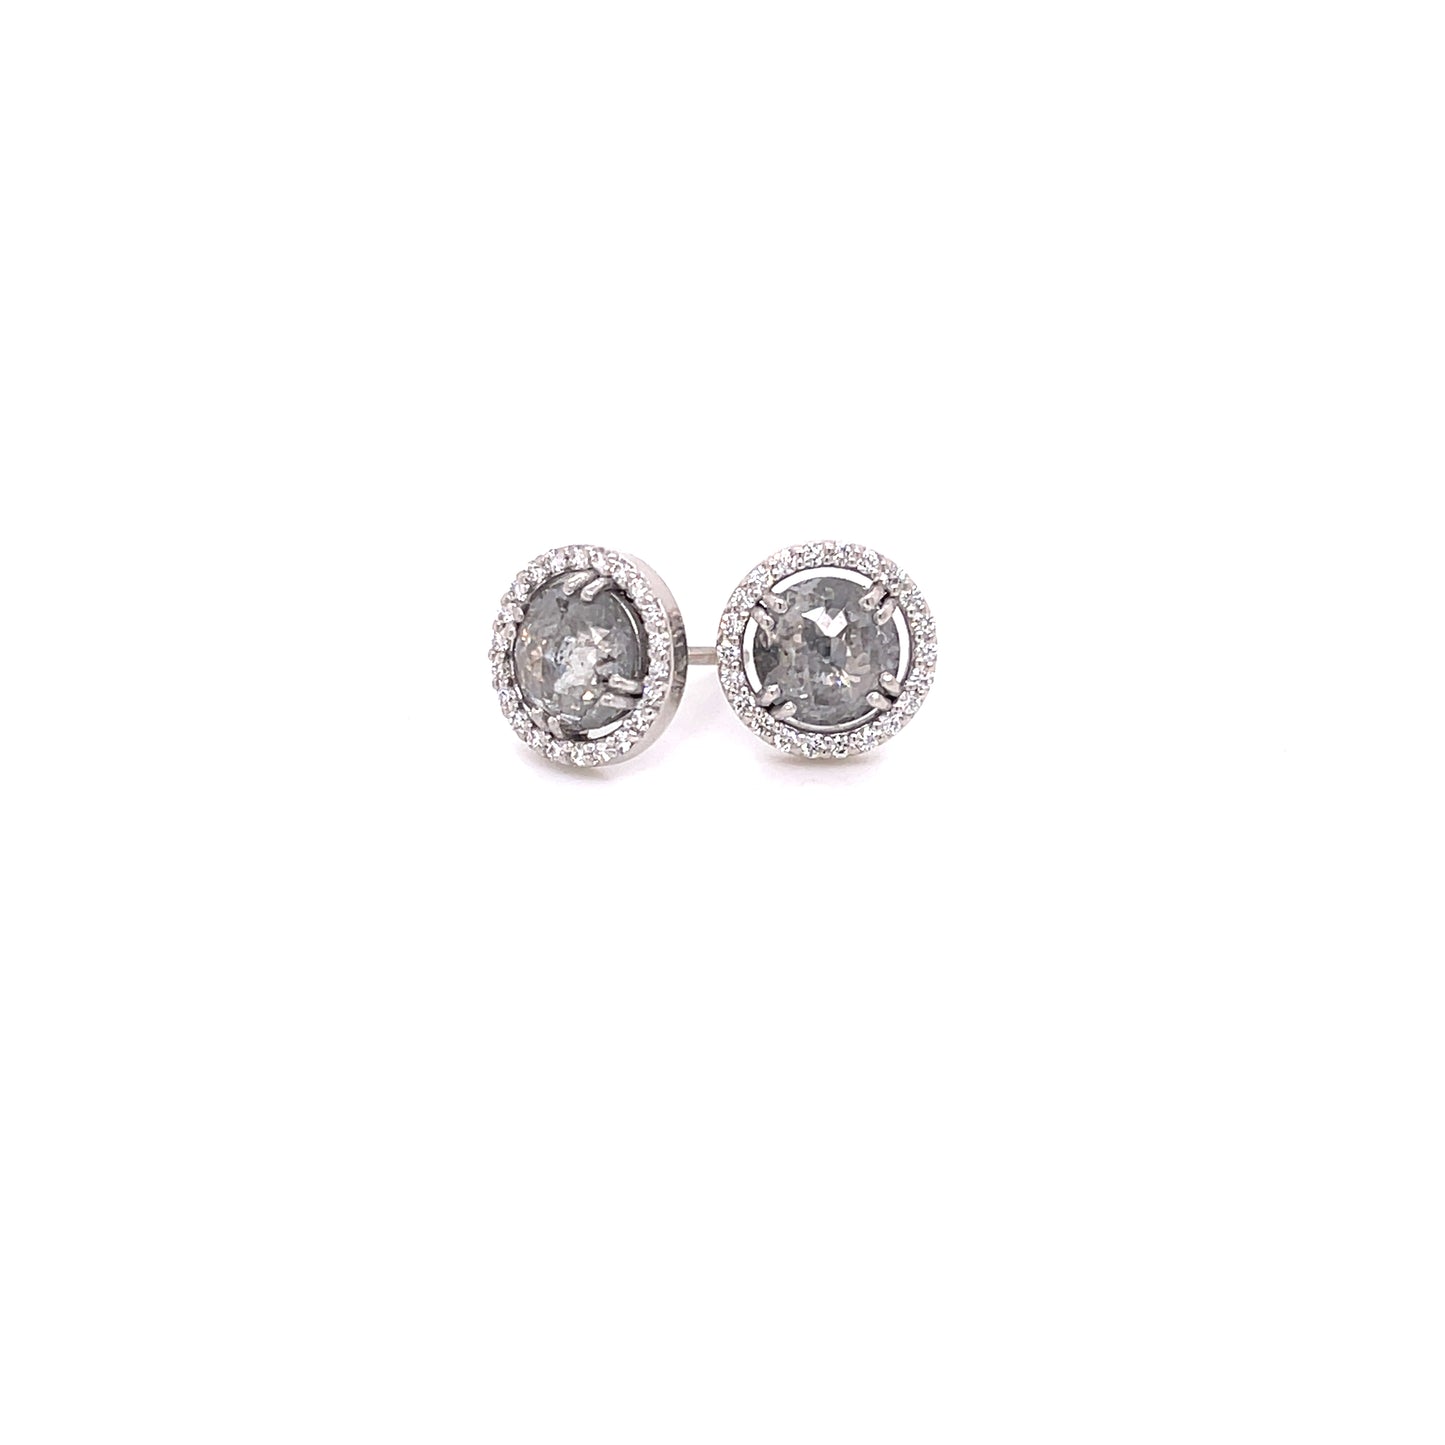 18k White Gold Salt and Pepper Rose Cut Diamond Studs with a White Diamond Halo